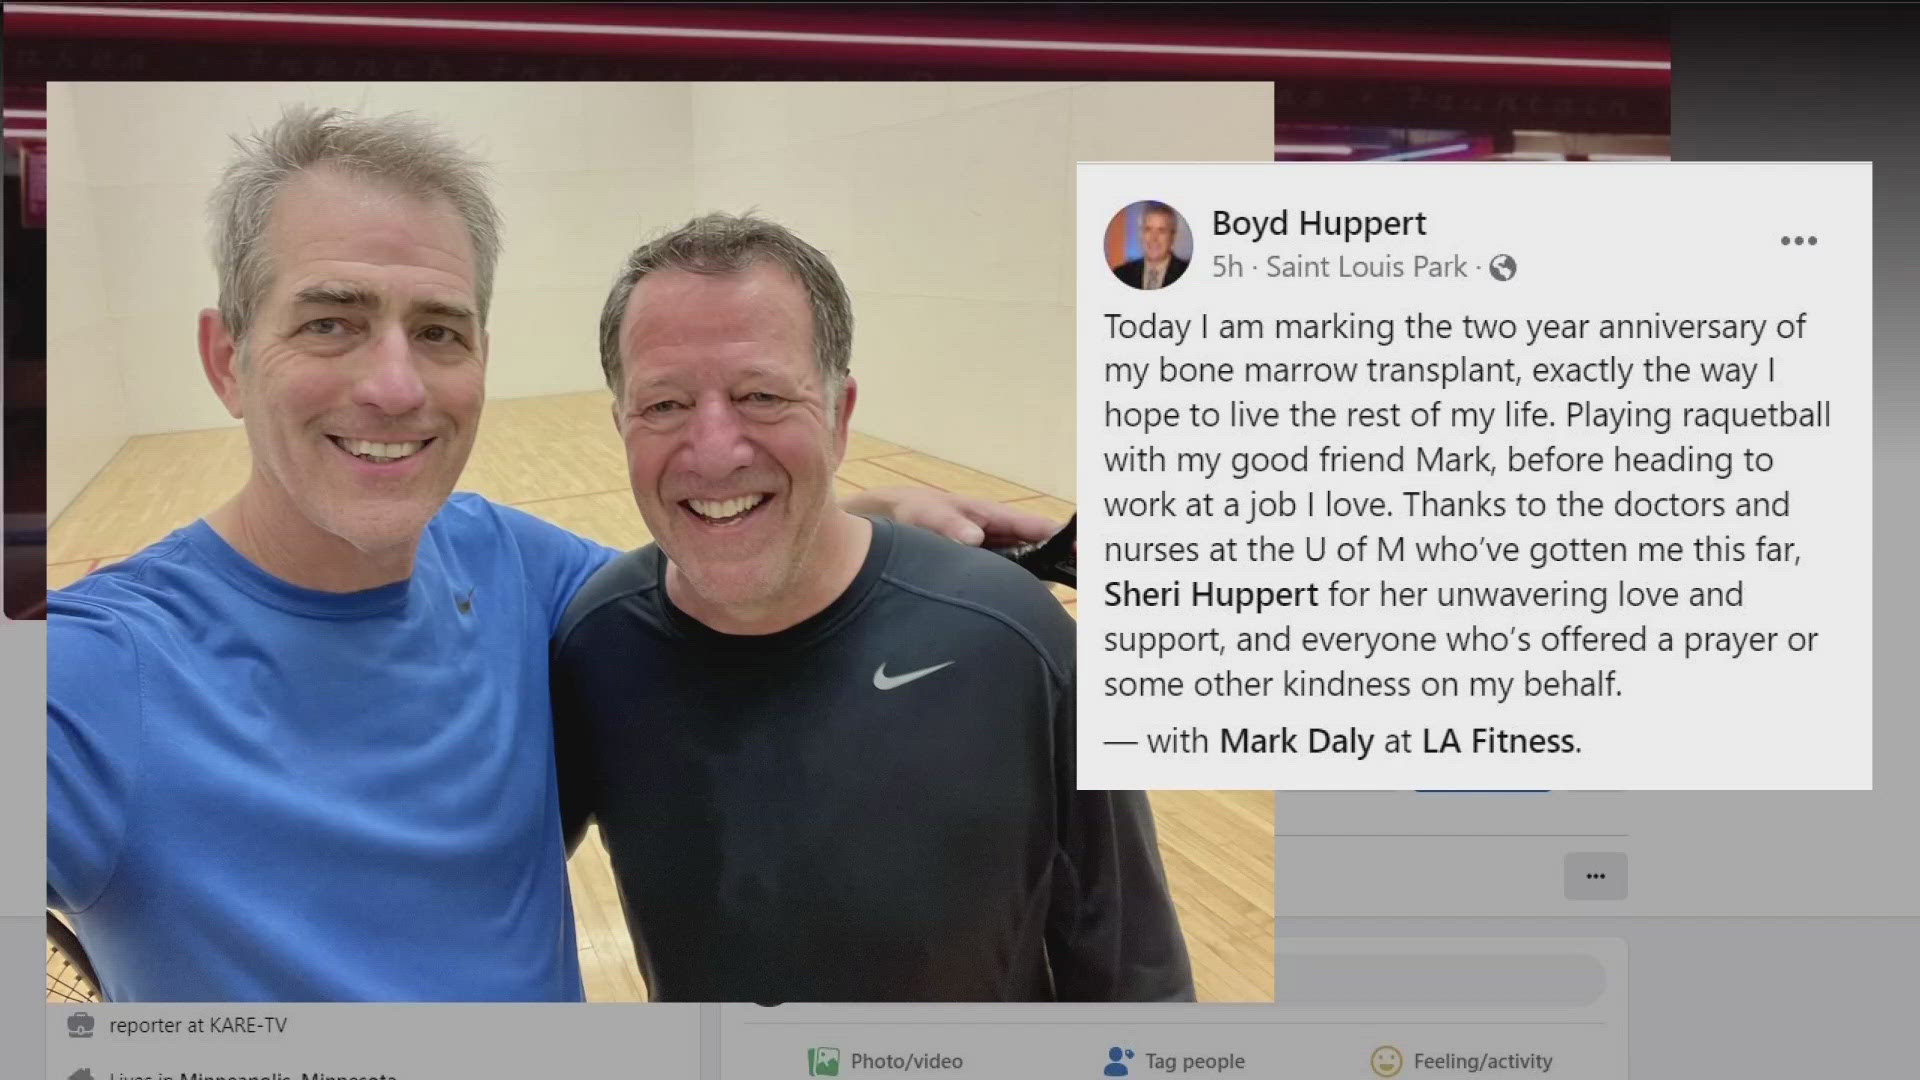 In today's good news, our dear friend and colleague Boyd Huppert marked two years since his bone marrow transplant to treat cancer.